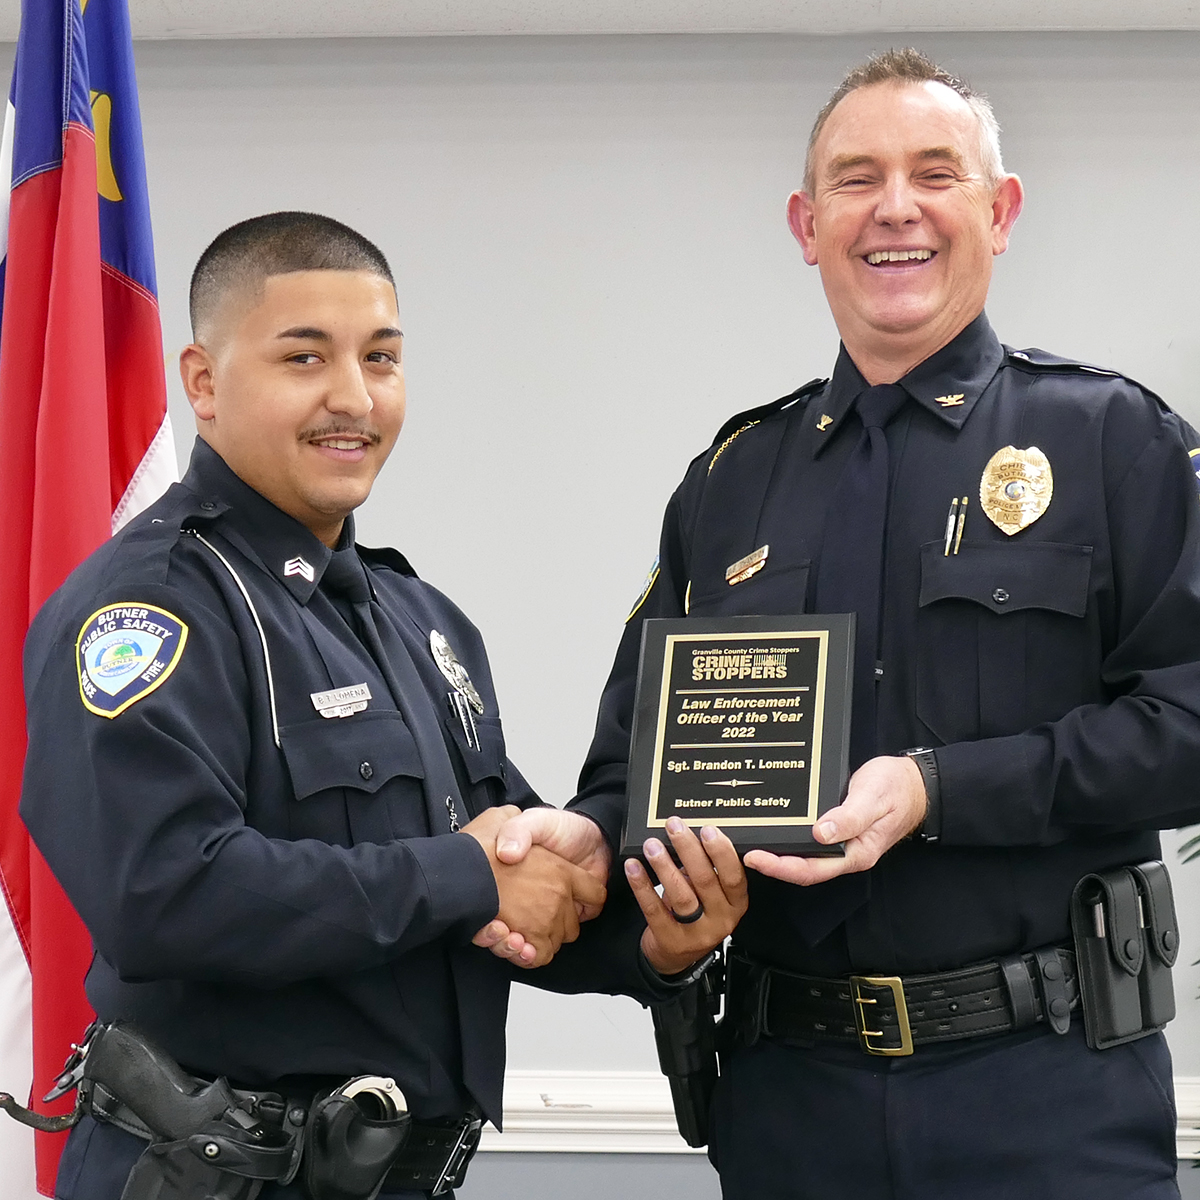 Law Enforcement Officer of the Year-Butner Public Safety